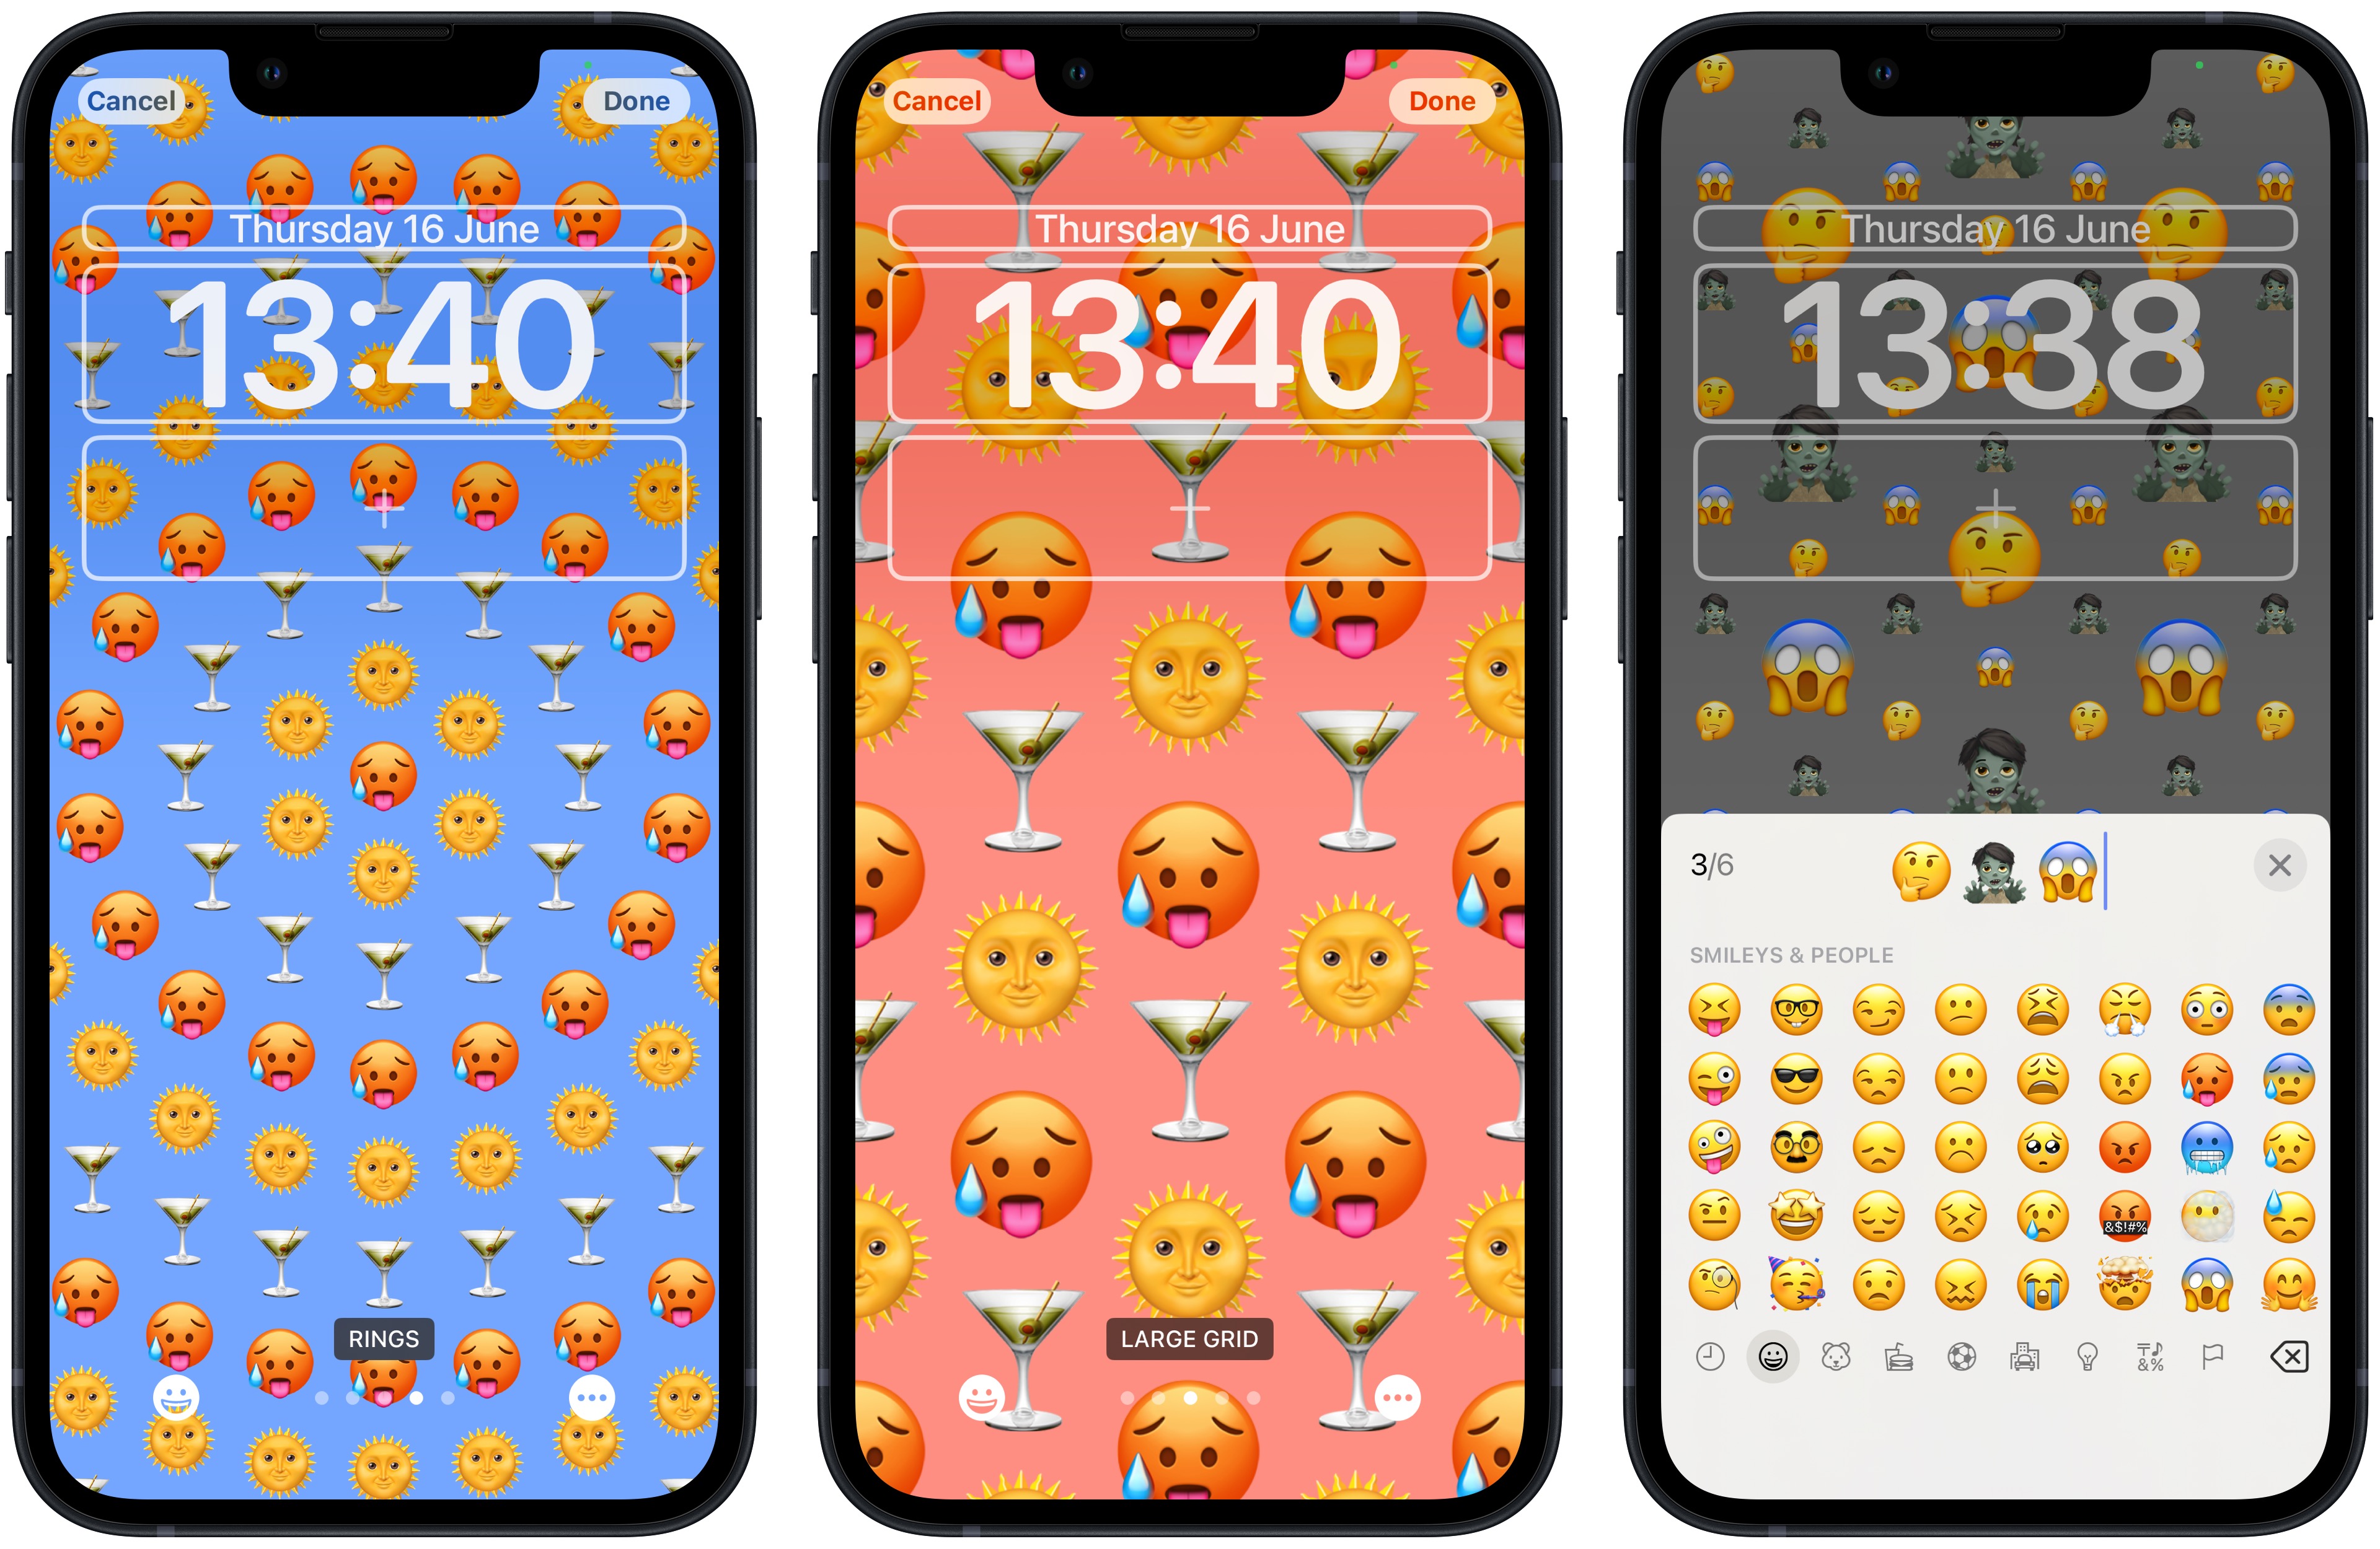 How To Get More Emojis On Your Phone